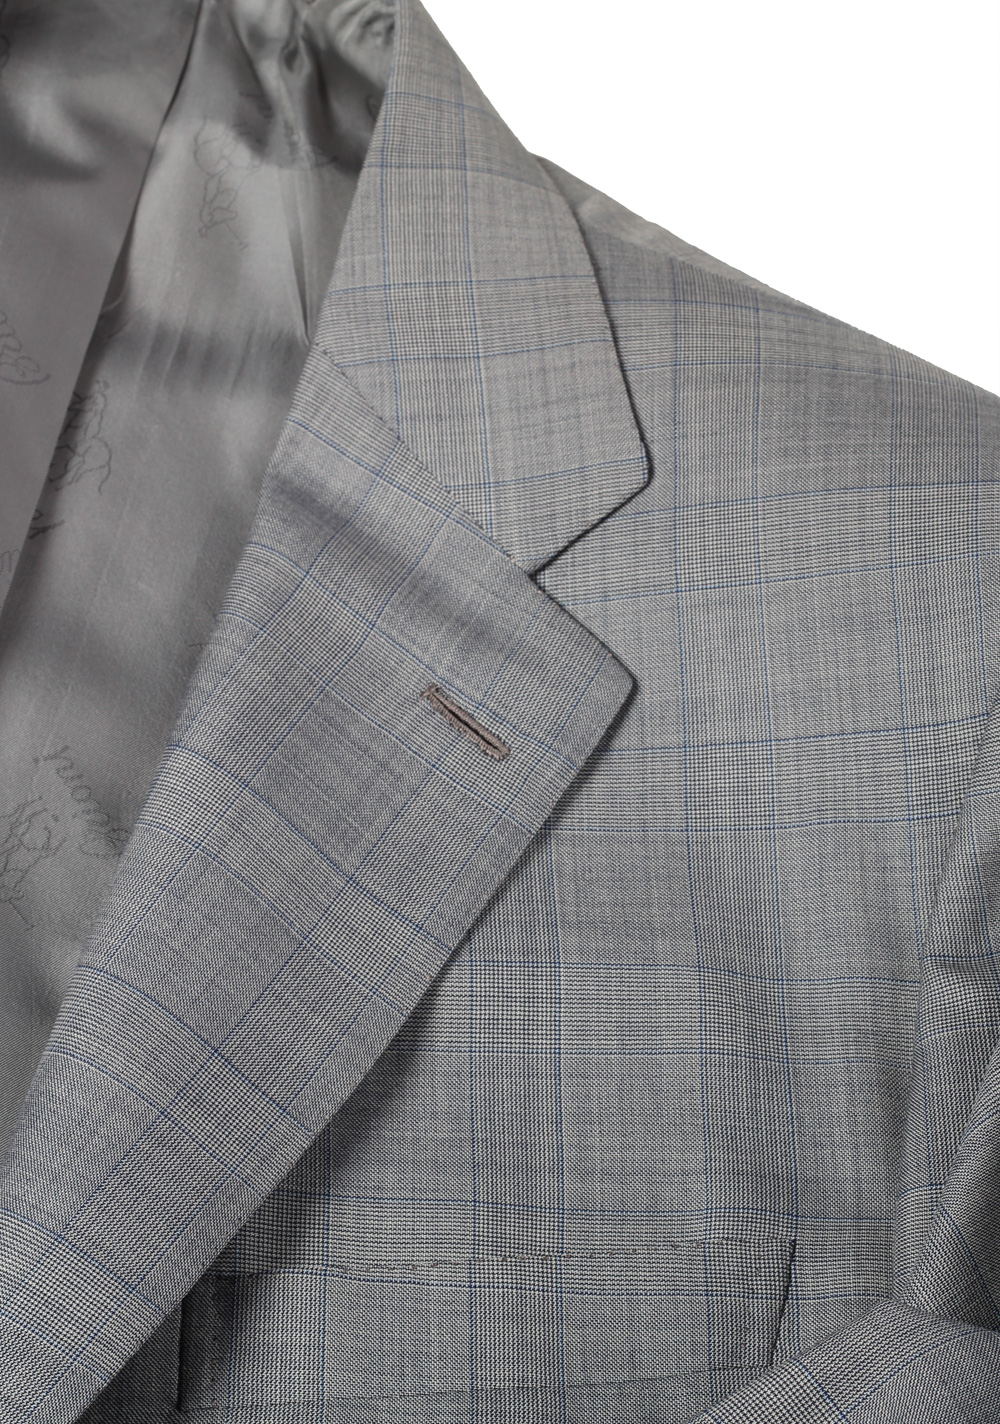 Brioni Parlamento Gray Checked Suit Size 50 / 40R U.S. Wool Silk ...